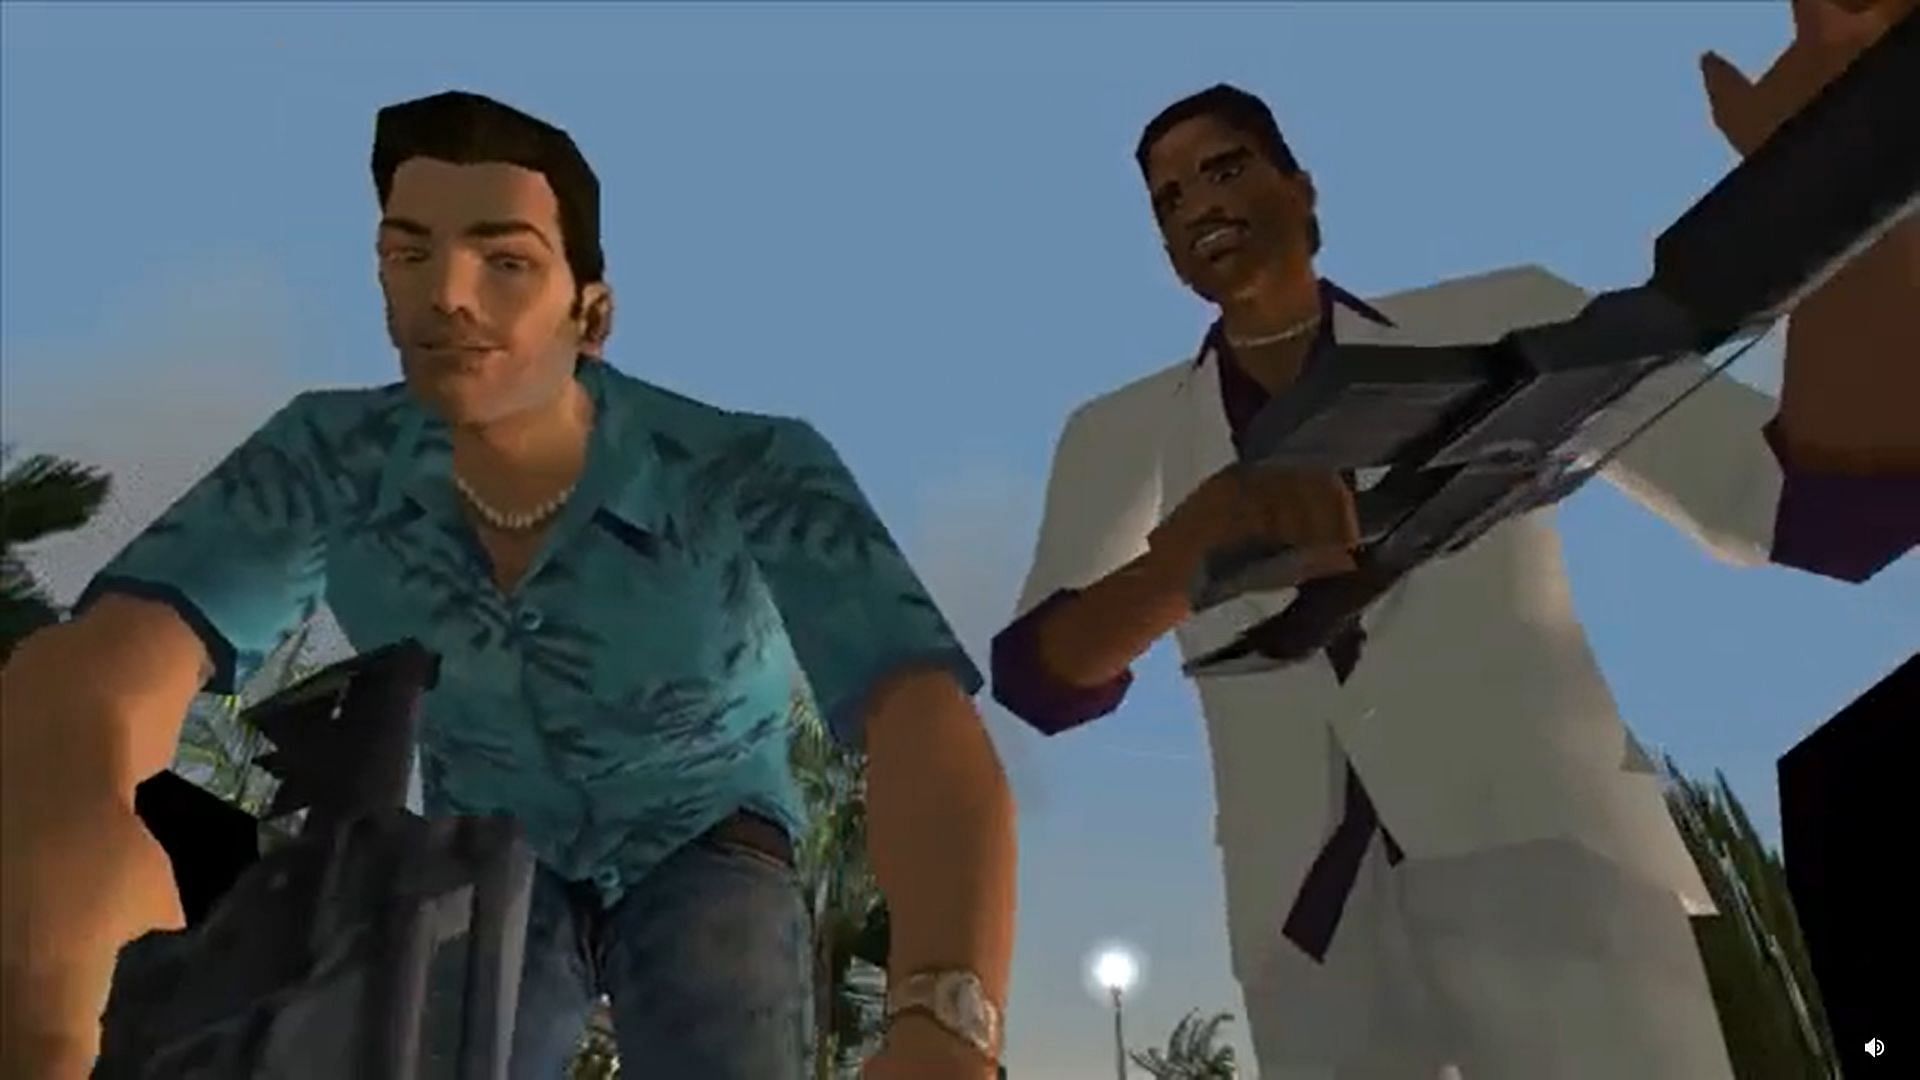 Tommy and Vance laughing before taking out Diaz in GTA Vice City (Image via Sportskeeda)